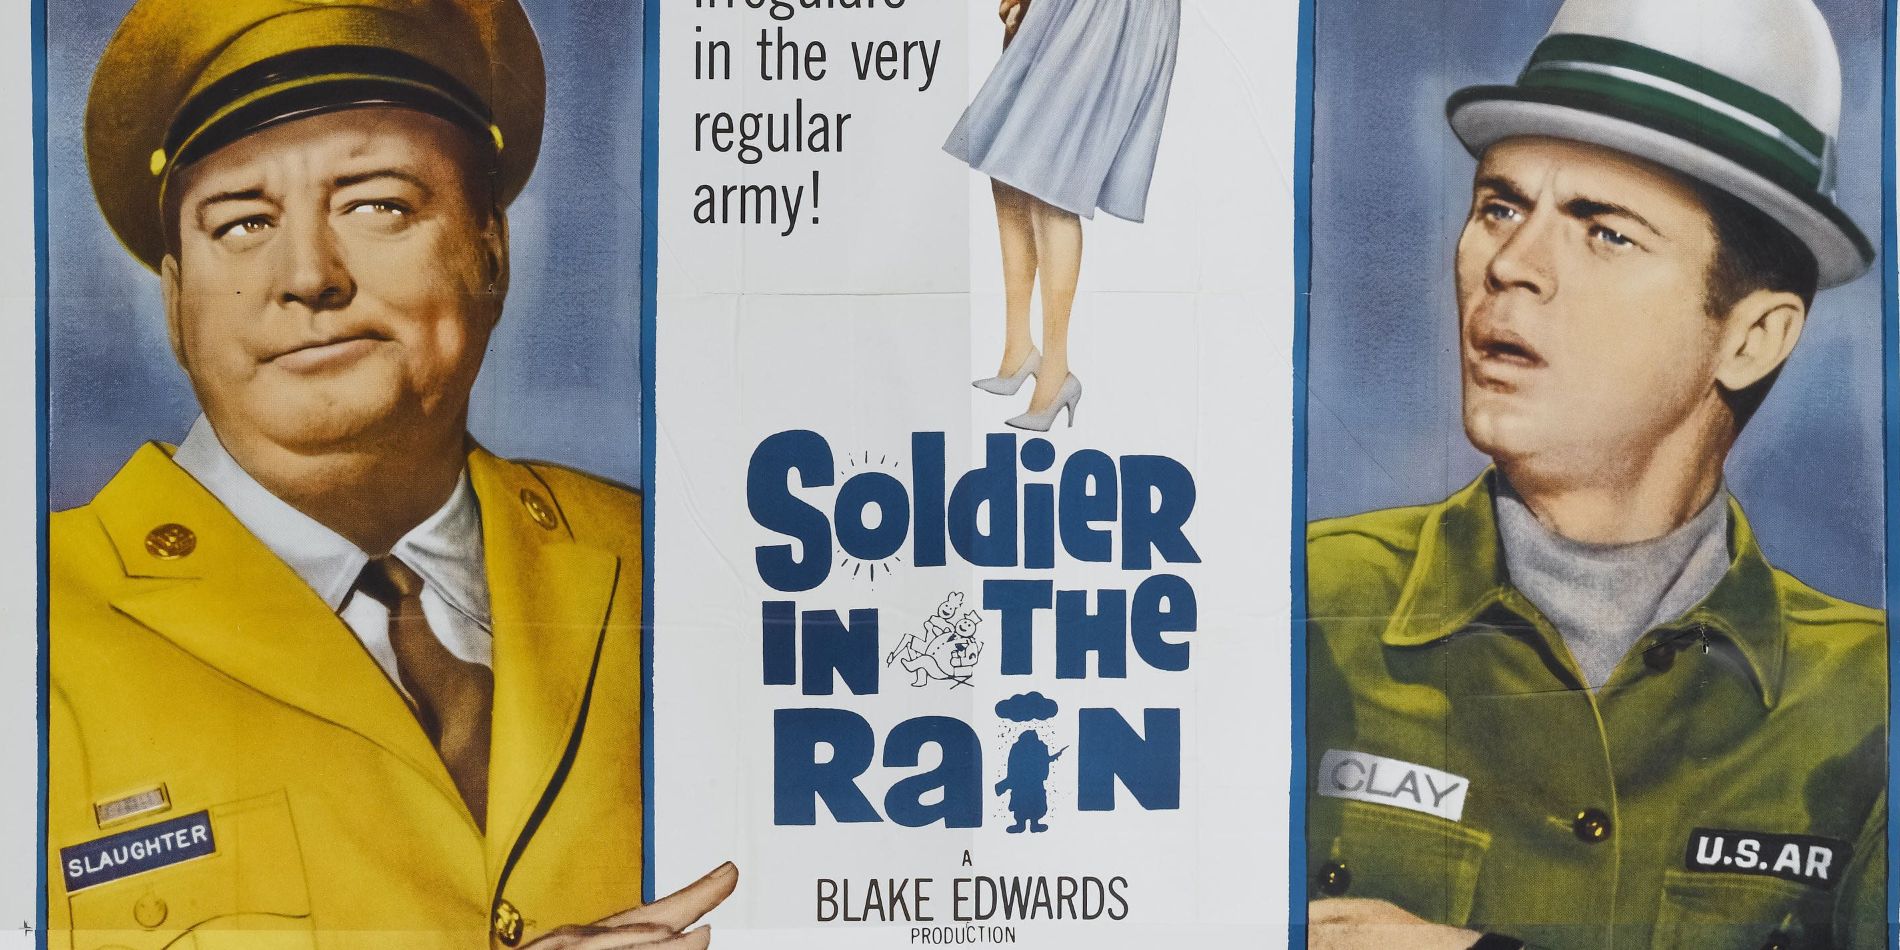 soldier in the rain poster 1963